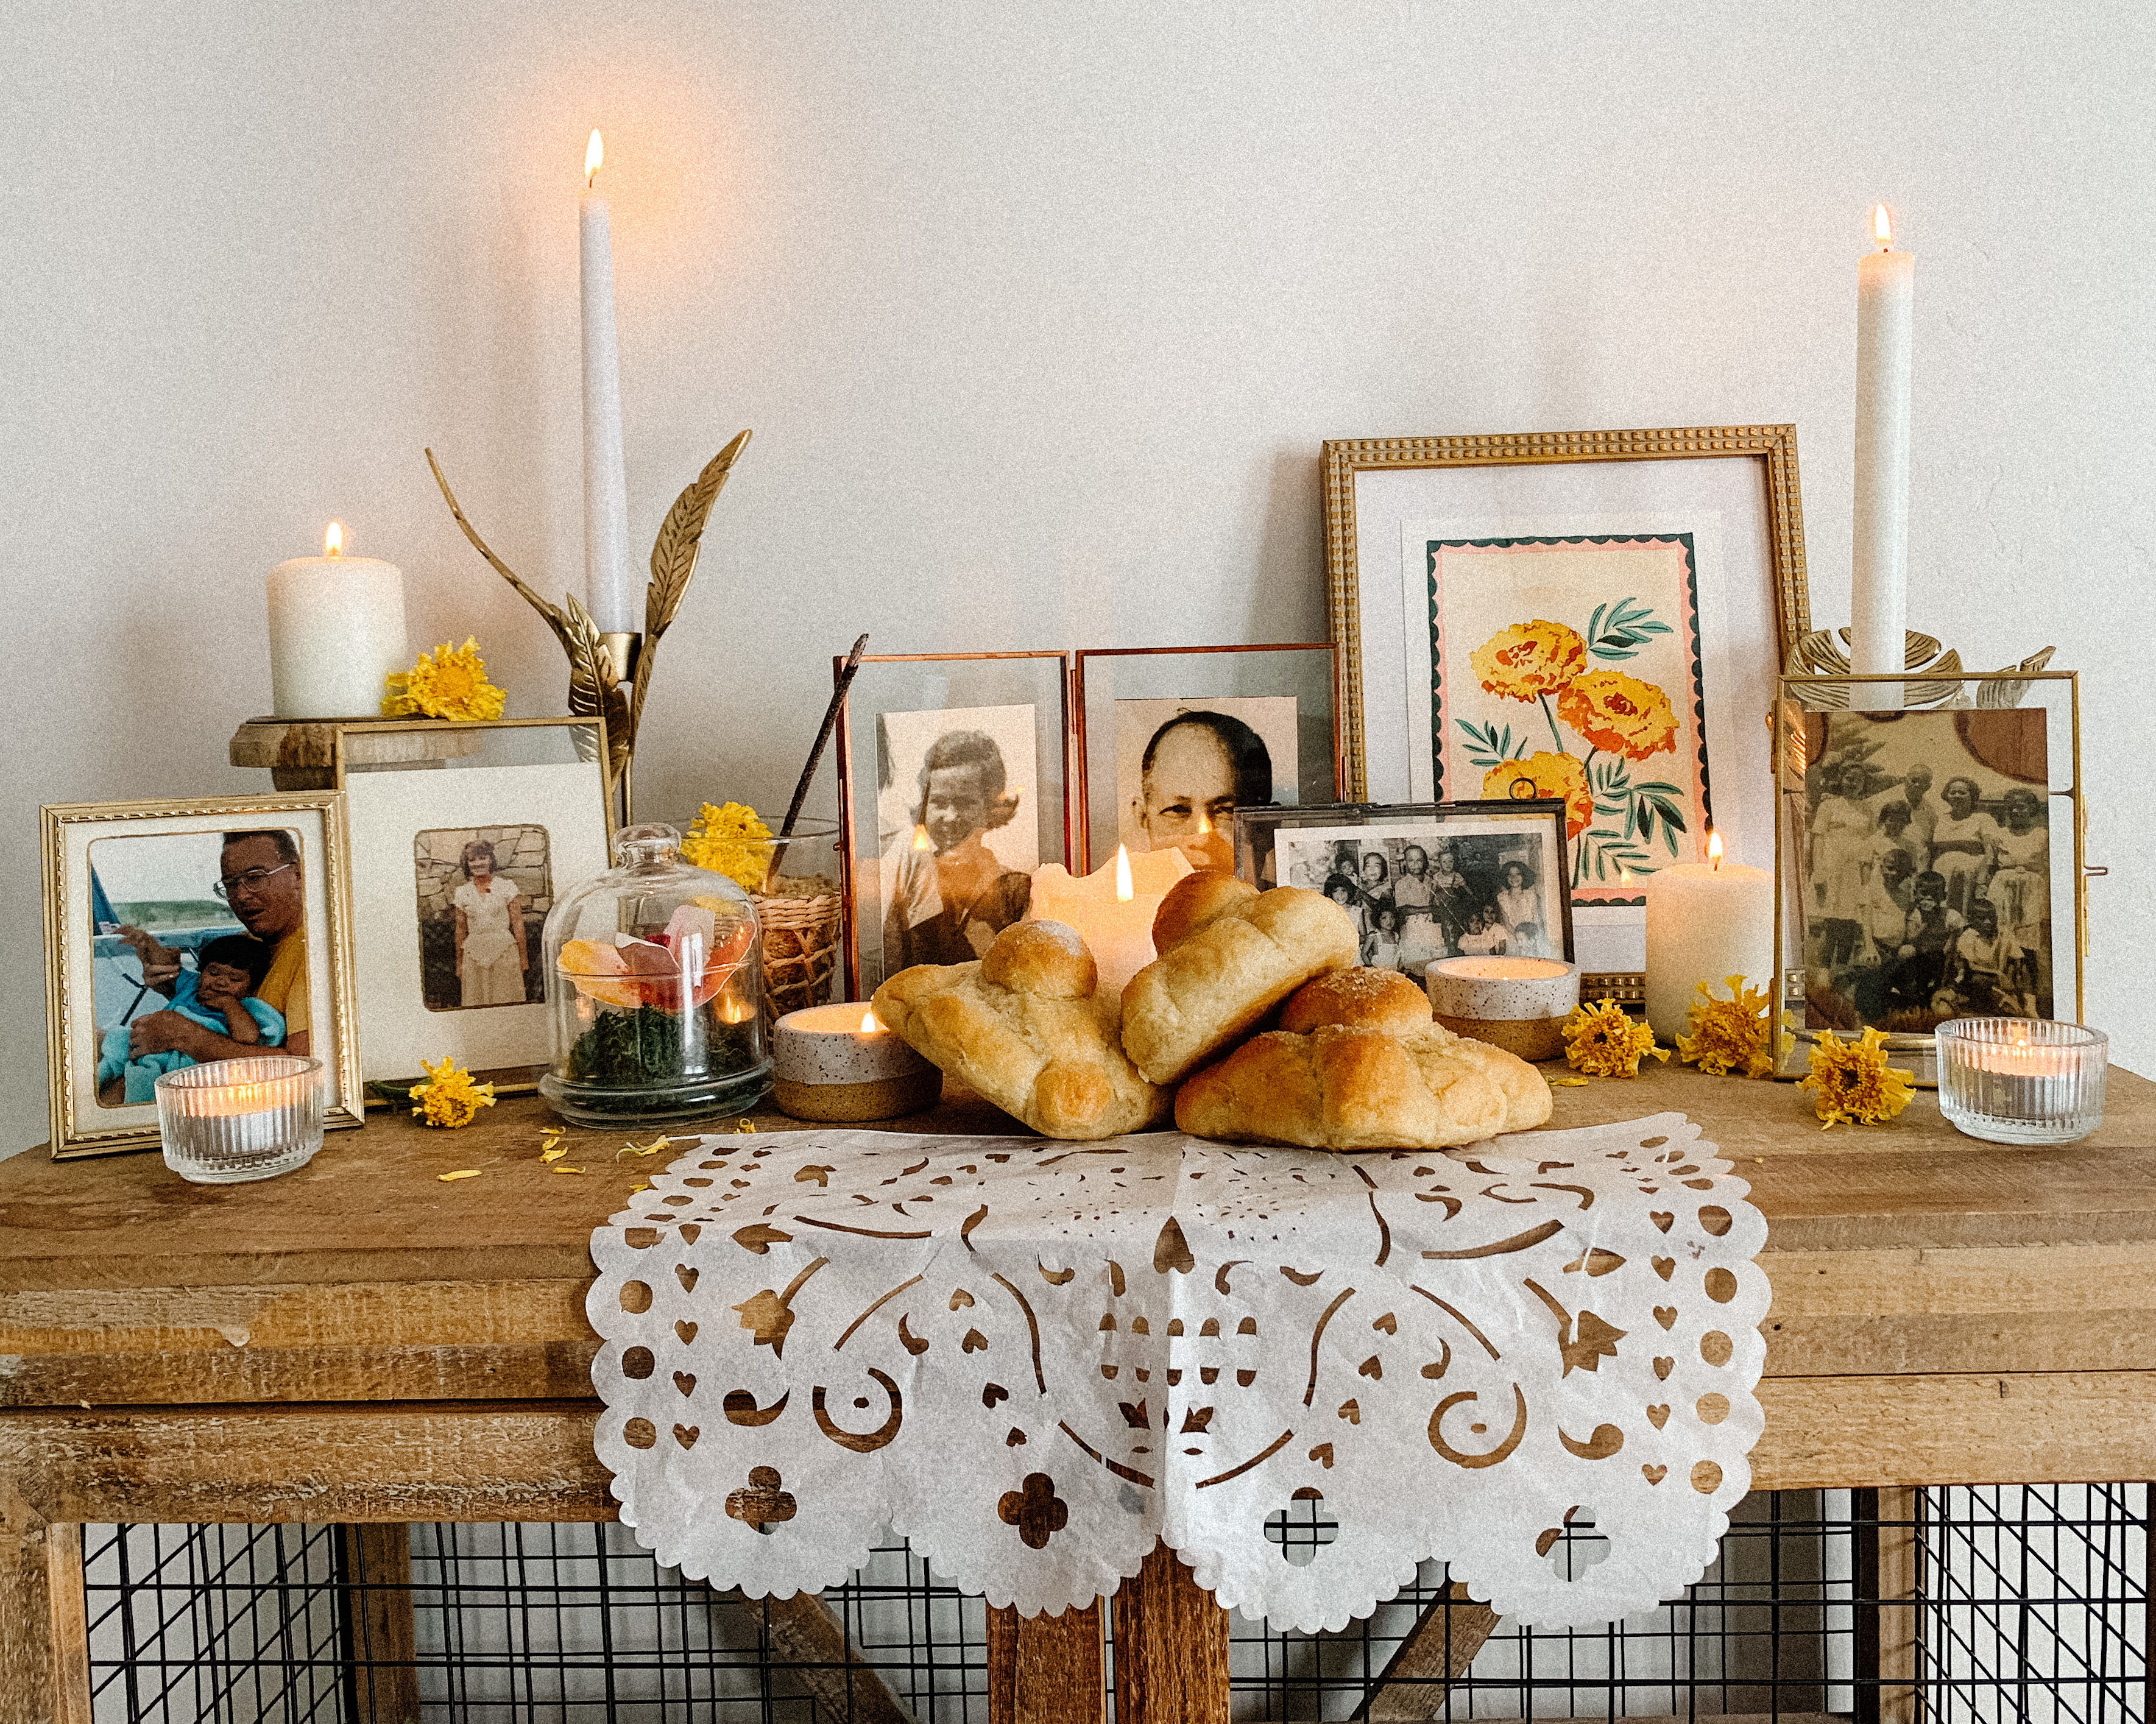 A small ofrenda (or altar) set on top of a bookshelf.  Candles are scattered around, warmly glowing. Sweet rolls, flowers and petals are placed among pictures of family members and friends who have passed.